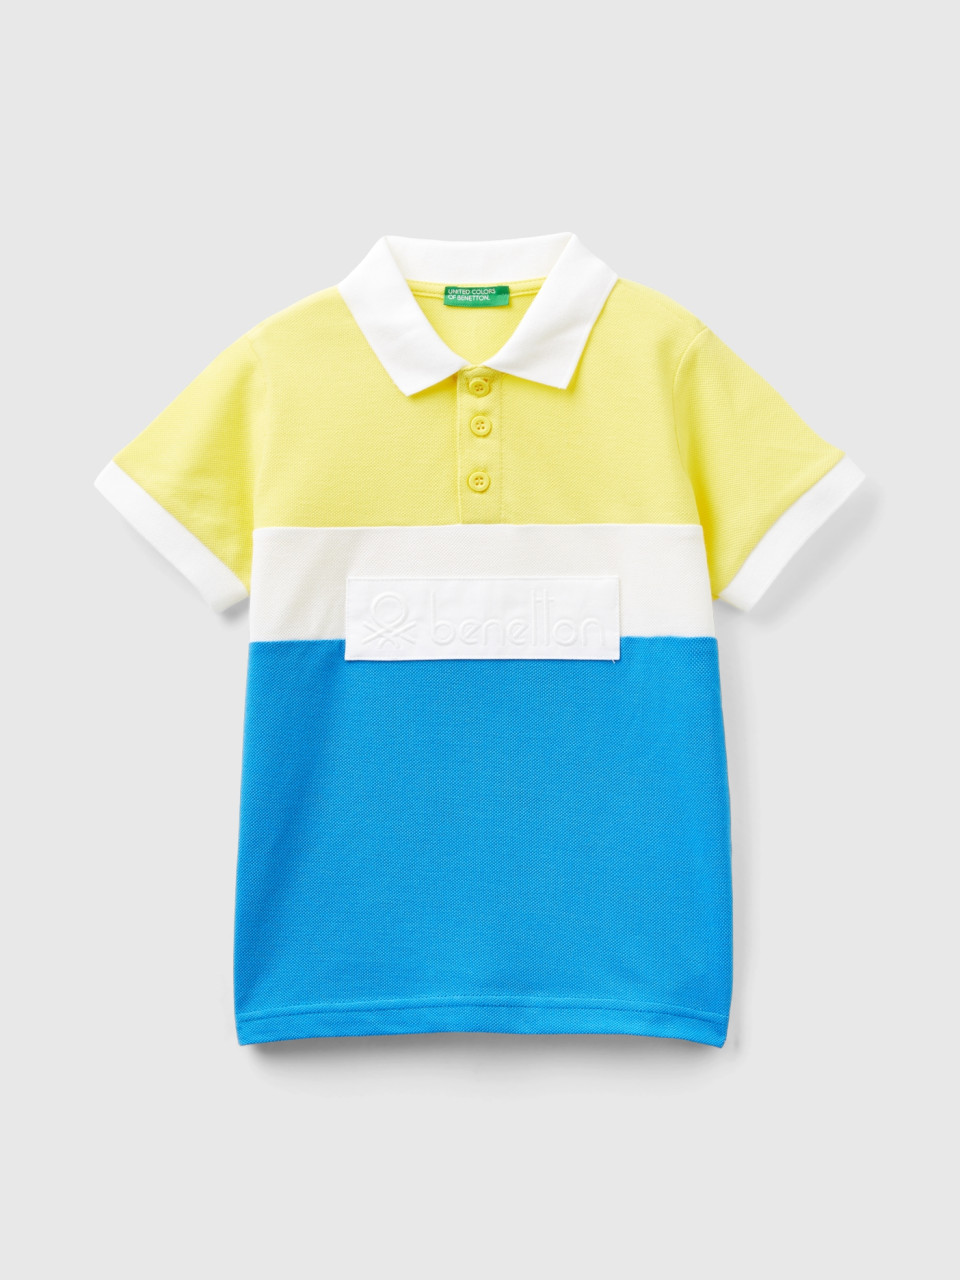 Benetton, Poloshirt In Color Block Mit Patch, Gelb, male